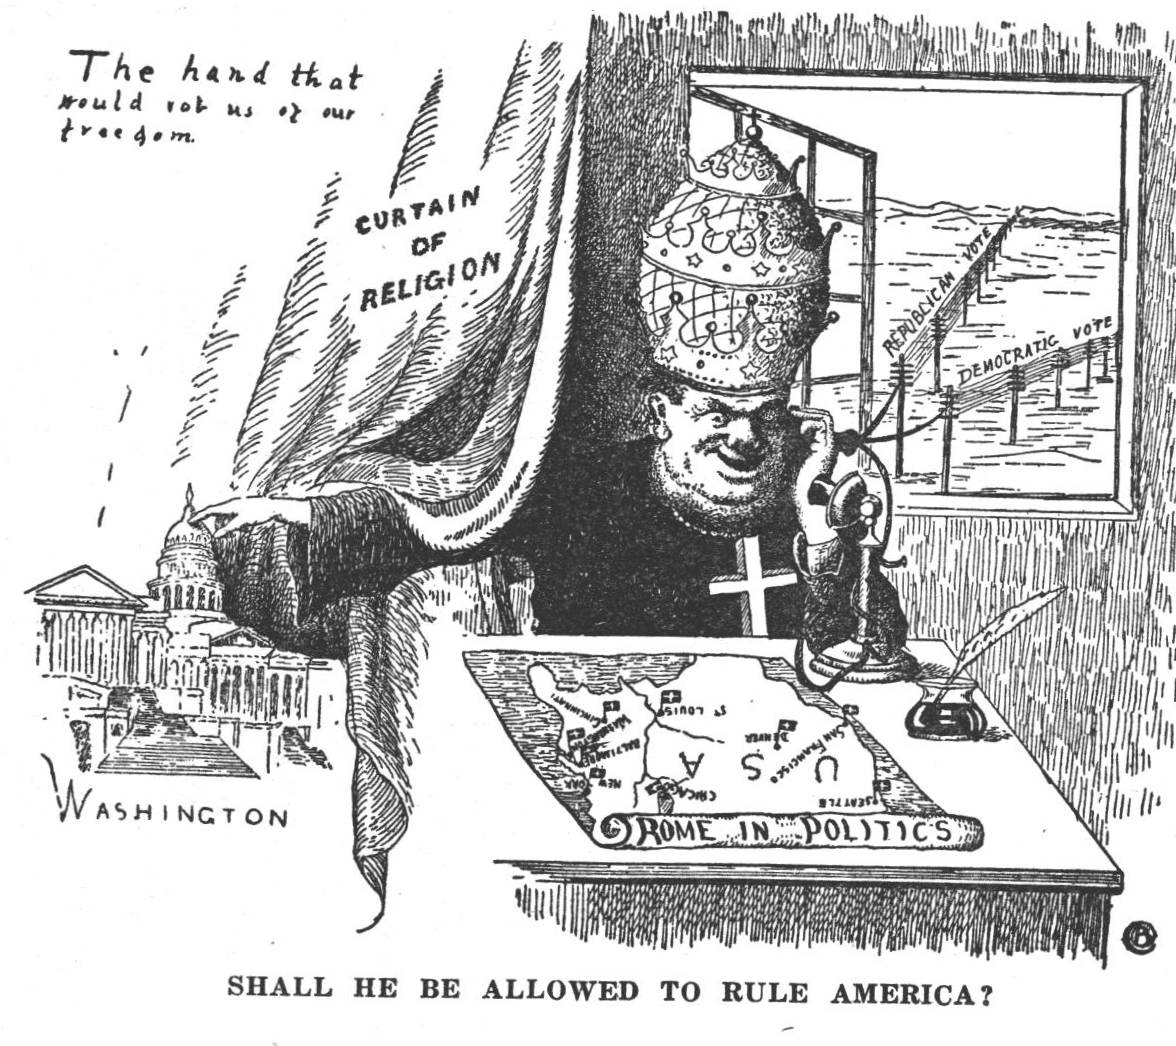 A History of Immigration Fear Mongering in Cartoons, page 1